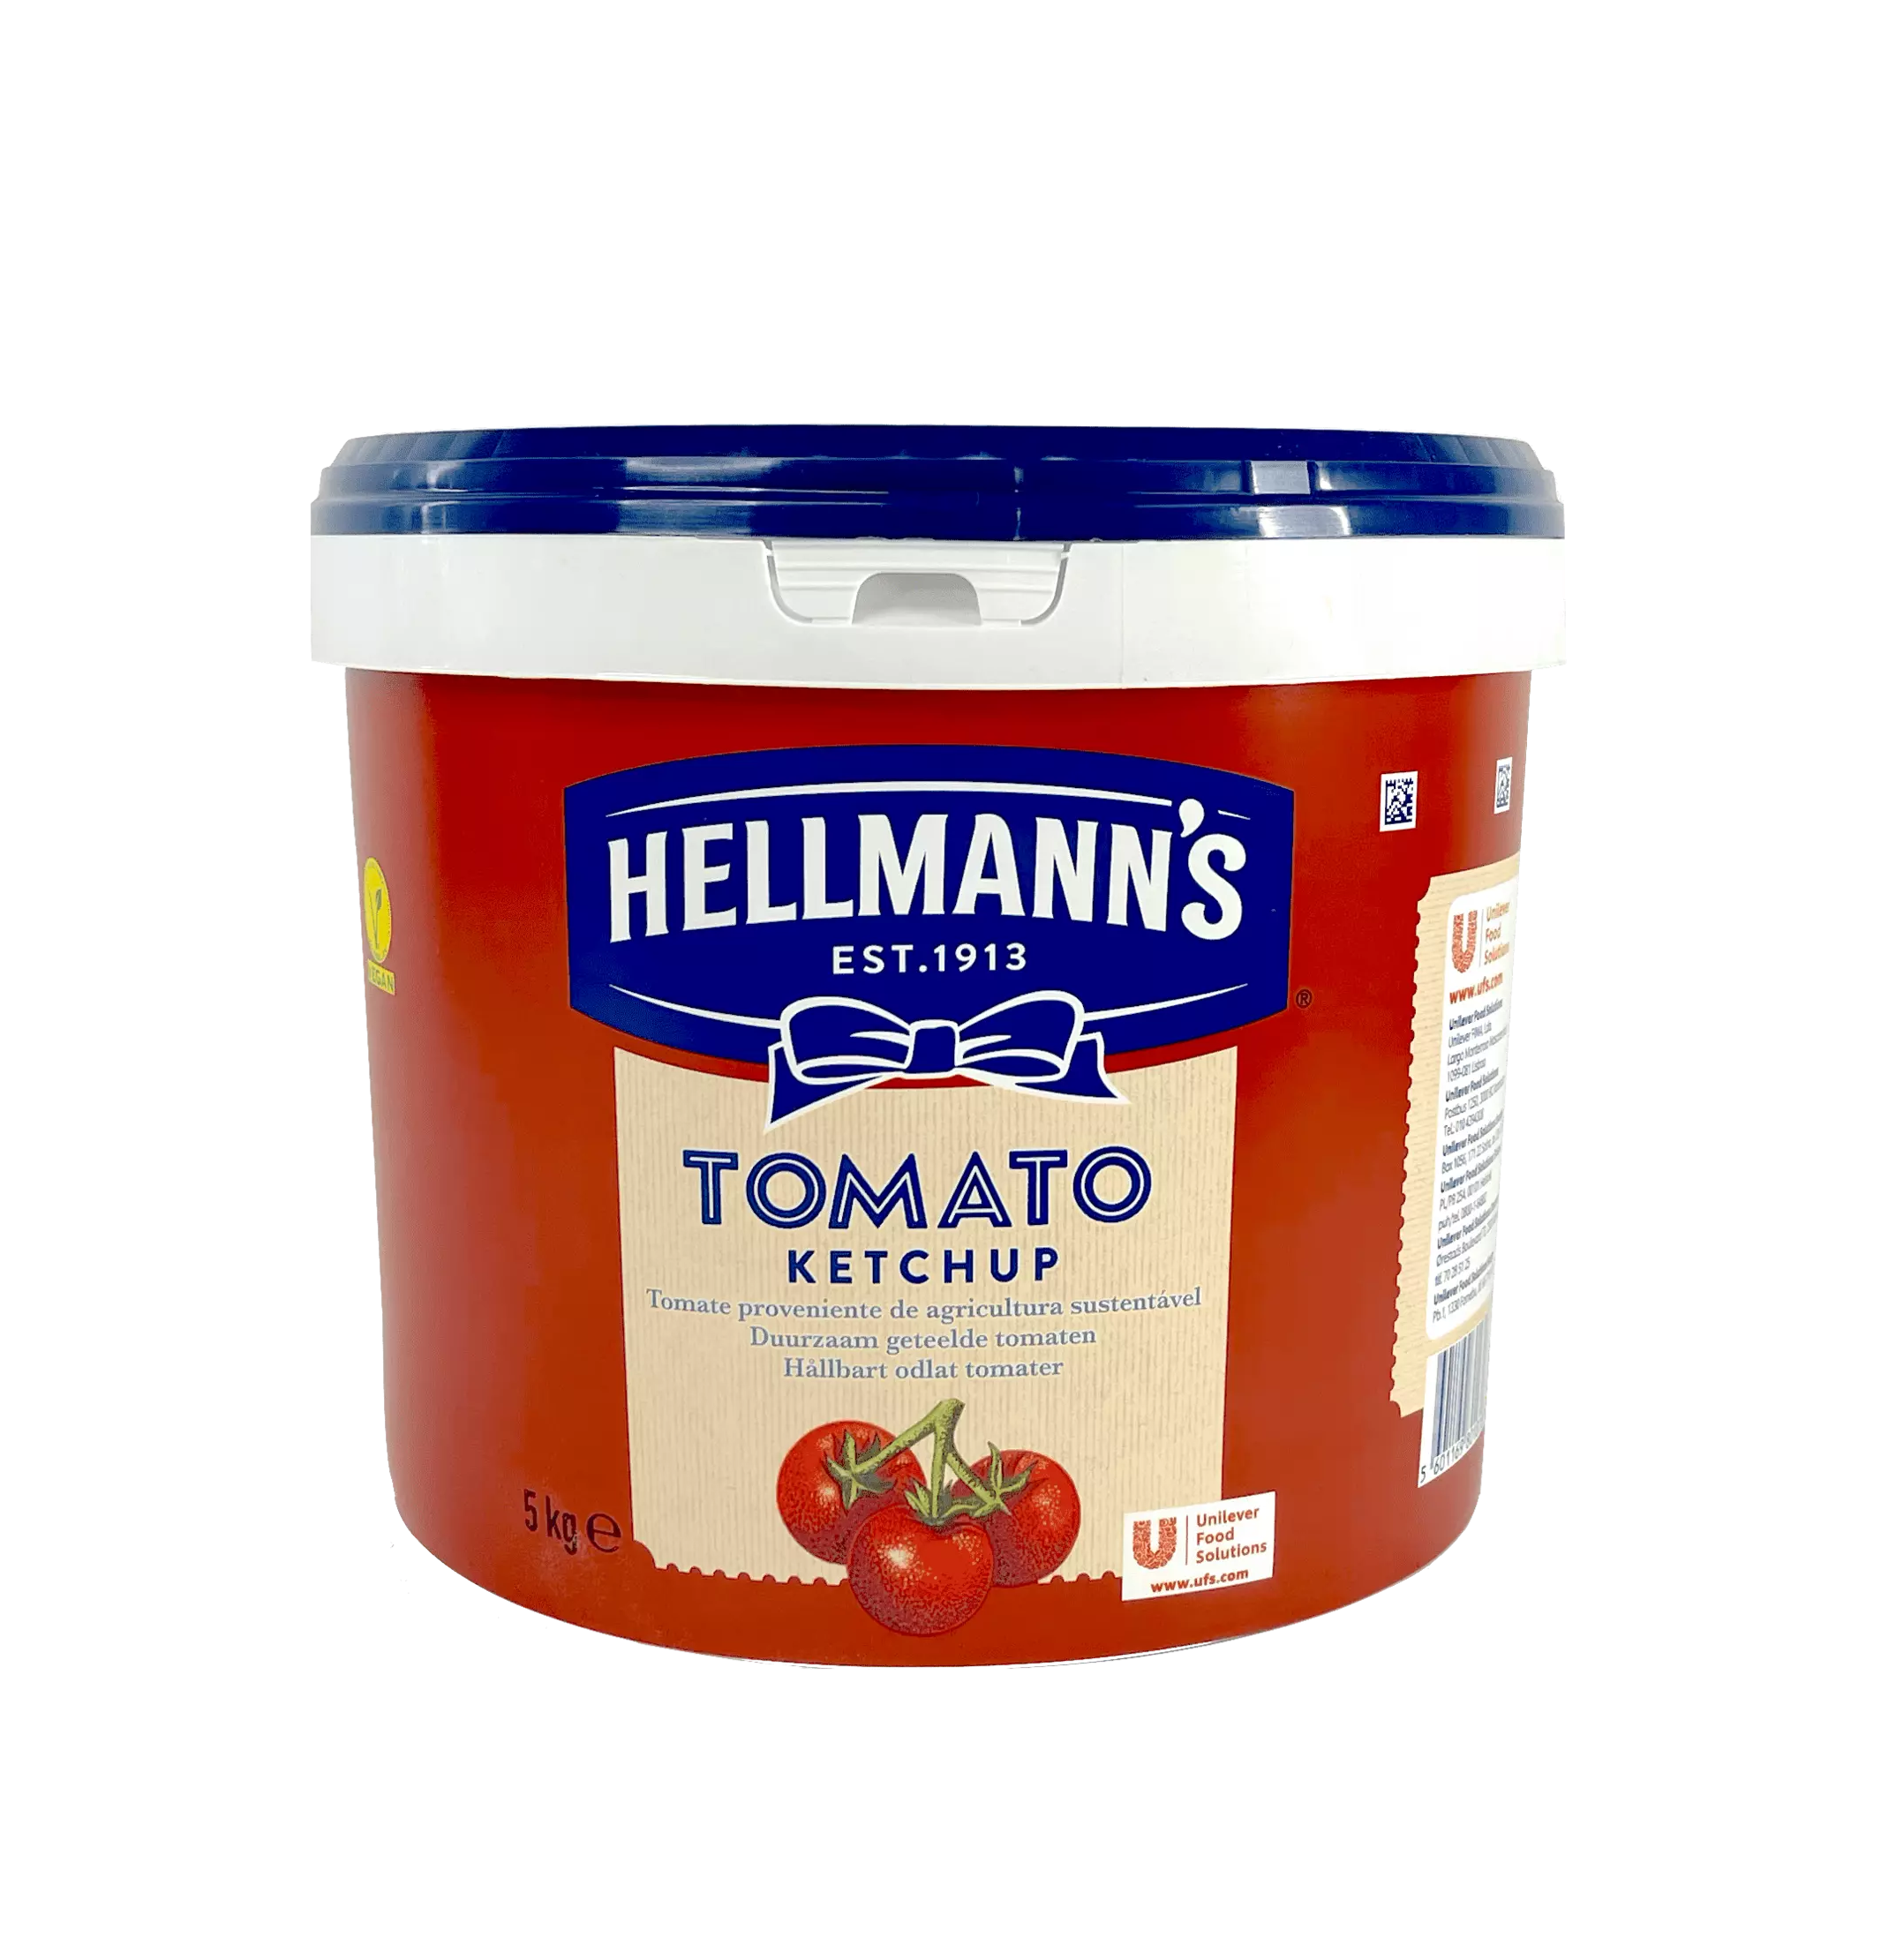 Tomato Ketchup 5kg/Can Hellmann's